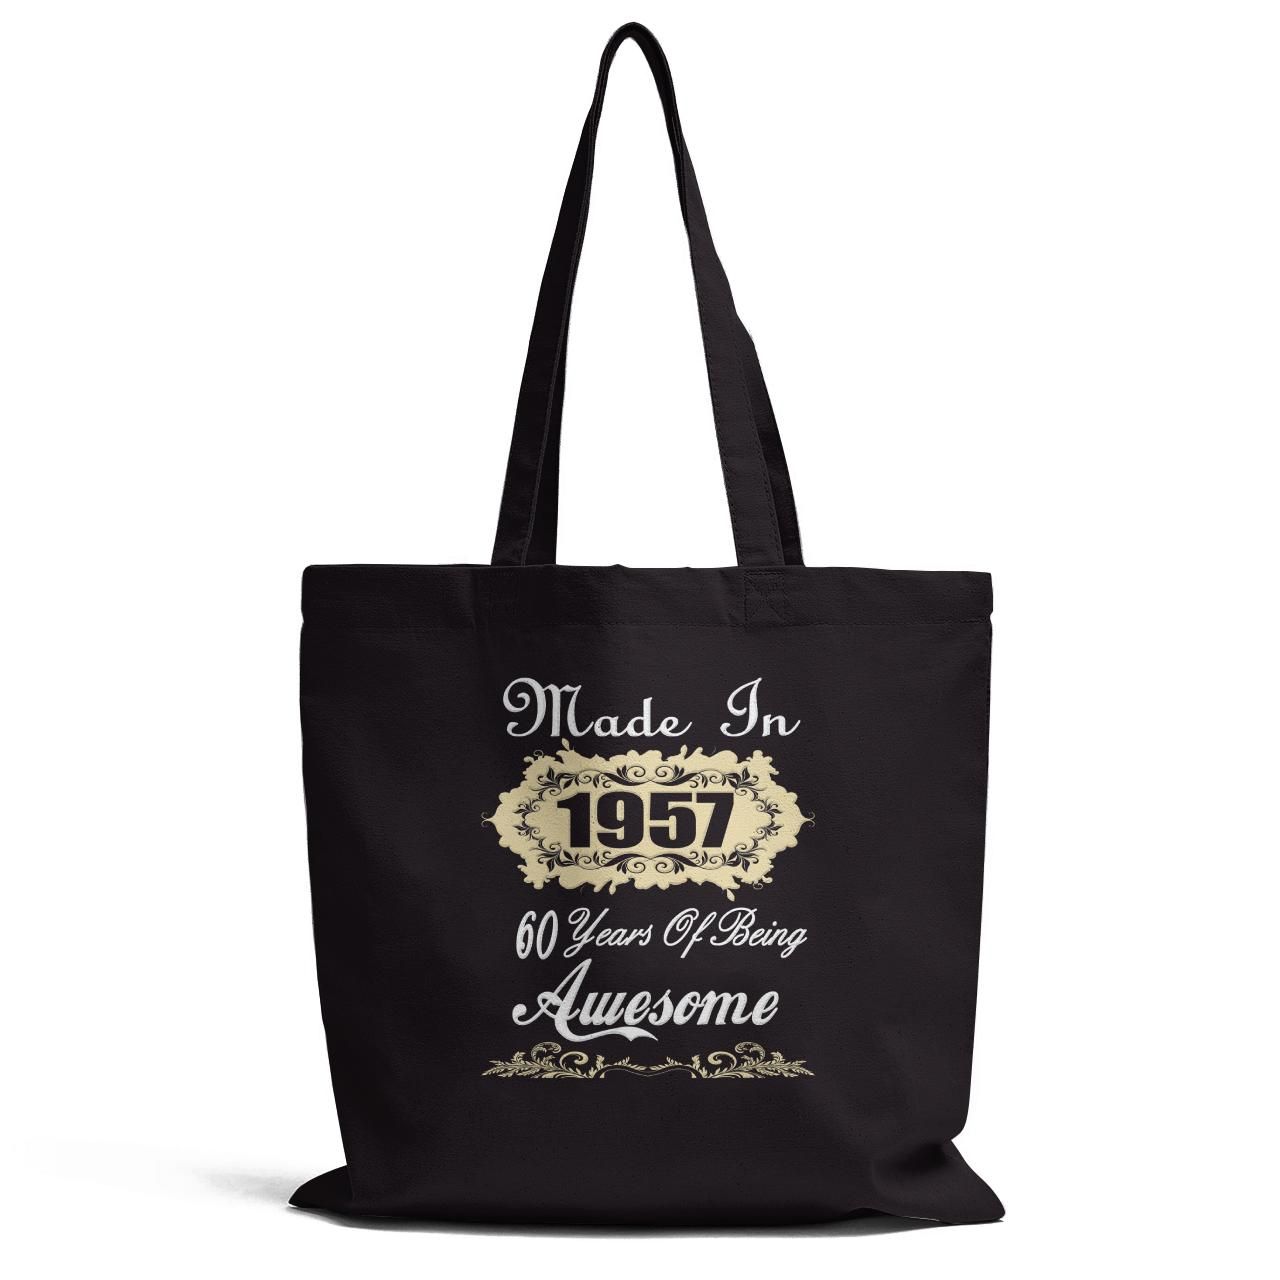 Made In 1957 60 Year Of Being Awesome Tote Bag